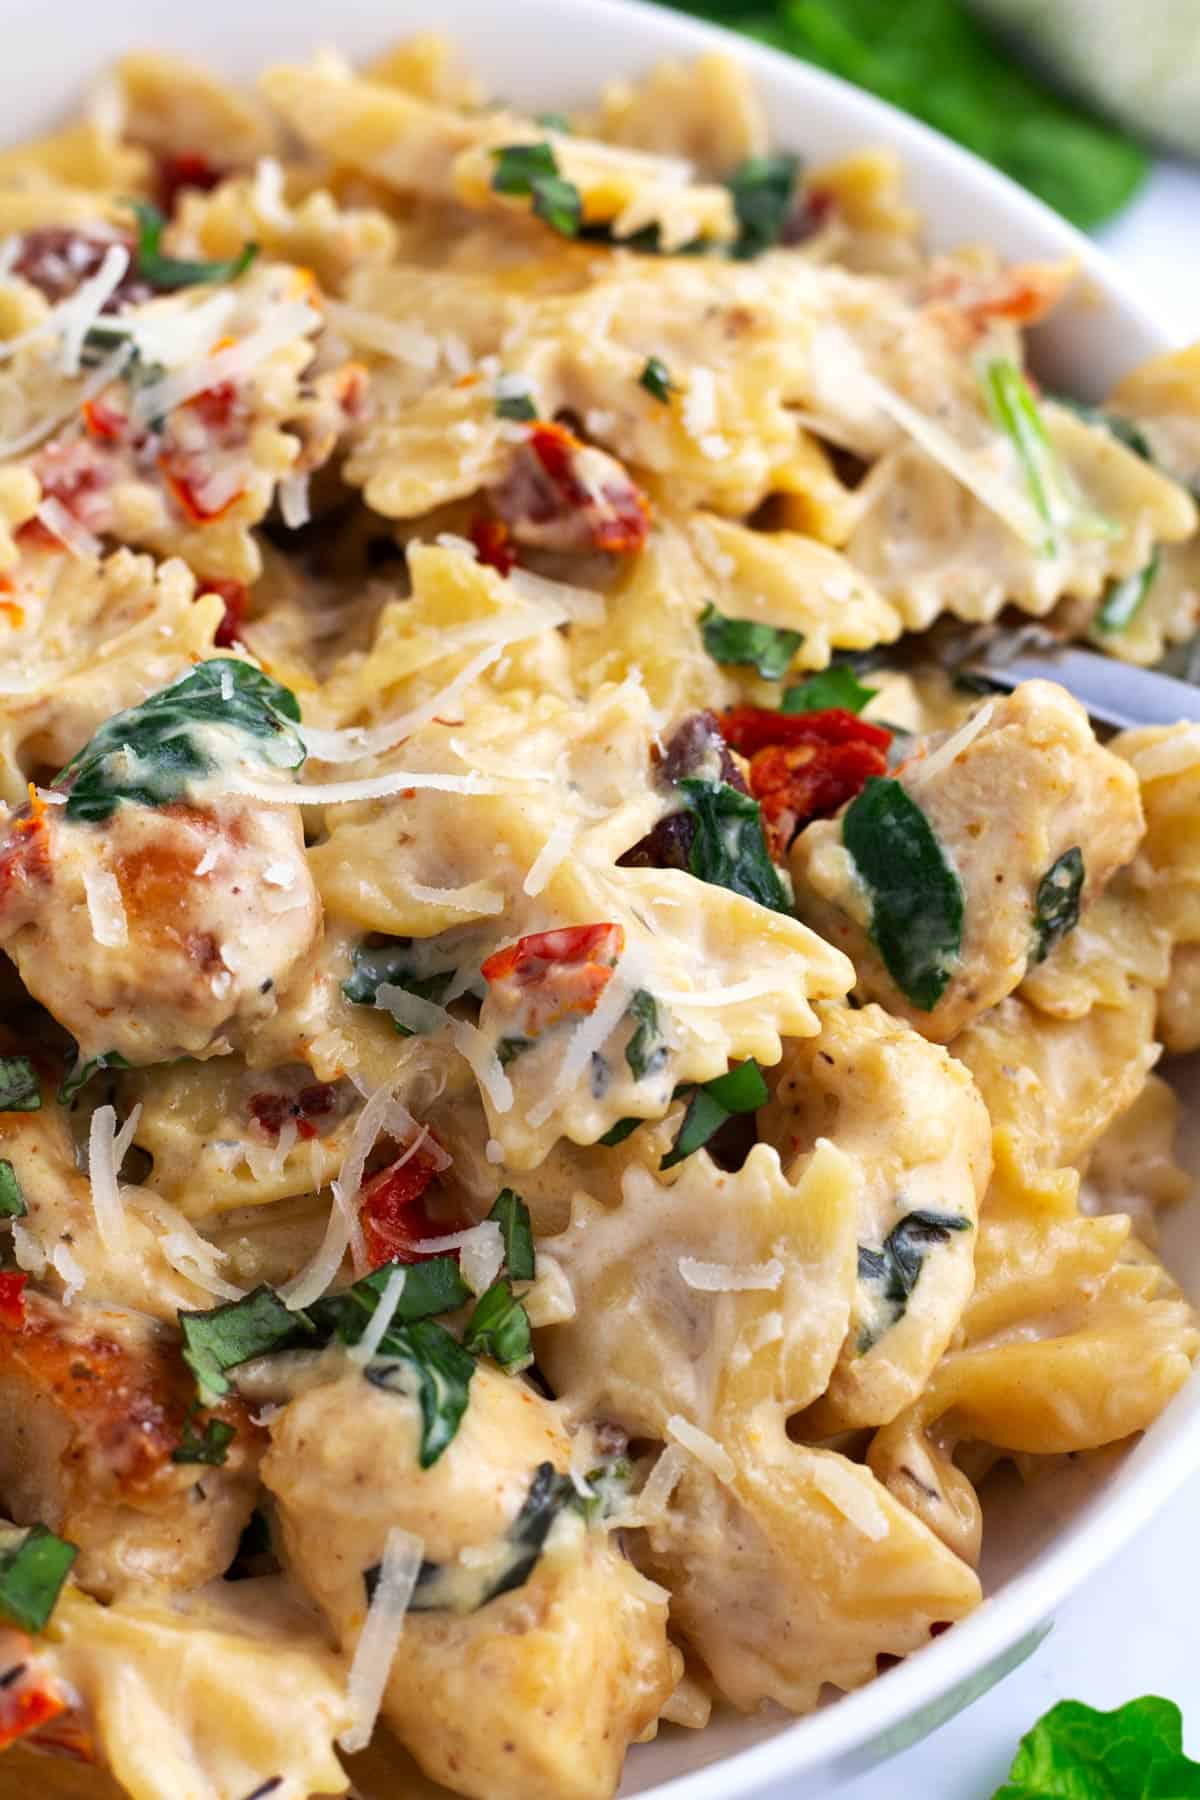 Upclose creamy sauce on farfalle pasta noodles with chicken, sun-dried tomatoes, basil, and cheese.